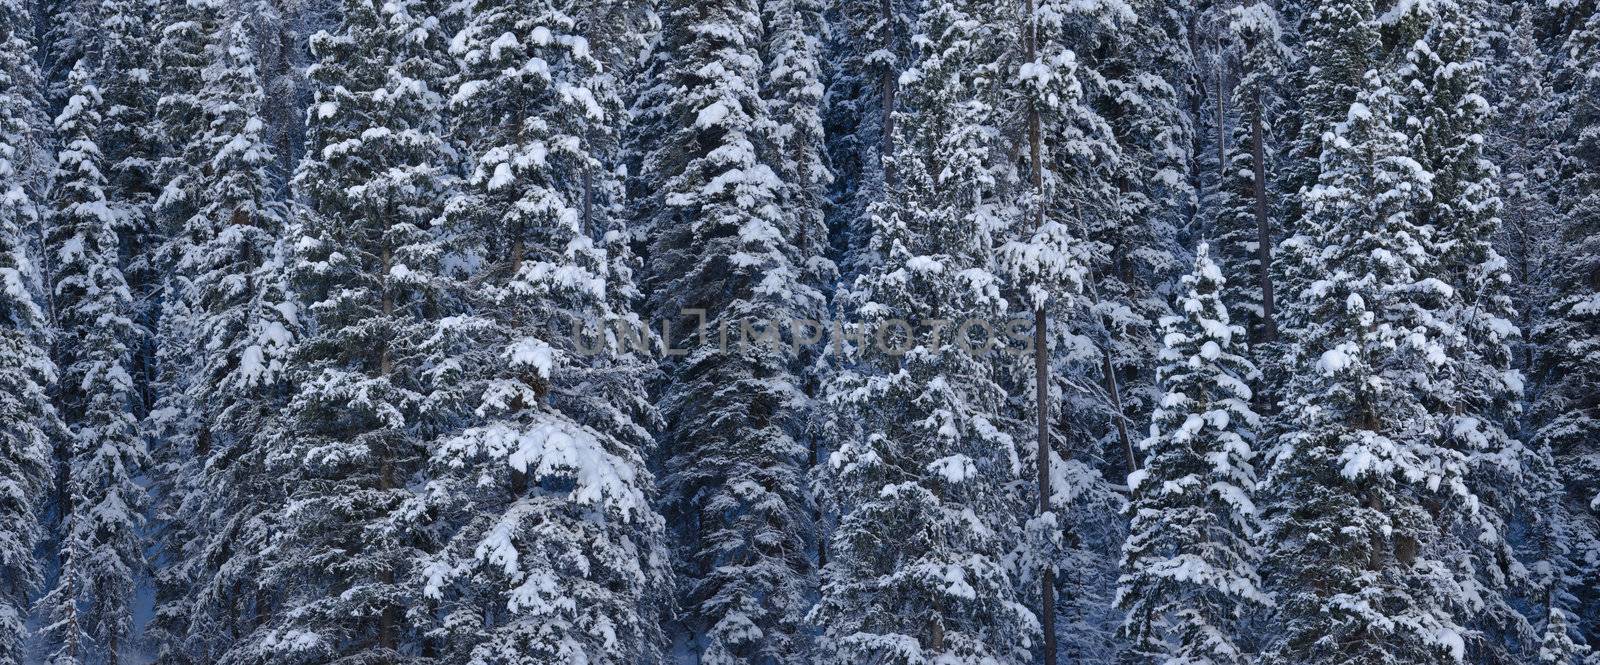 A dense coniferous forest after a snow storm, Gallatin National Forest, Montan, USA